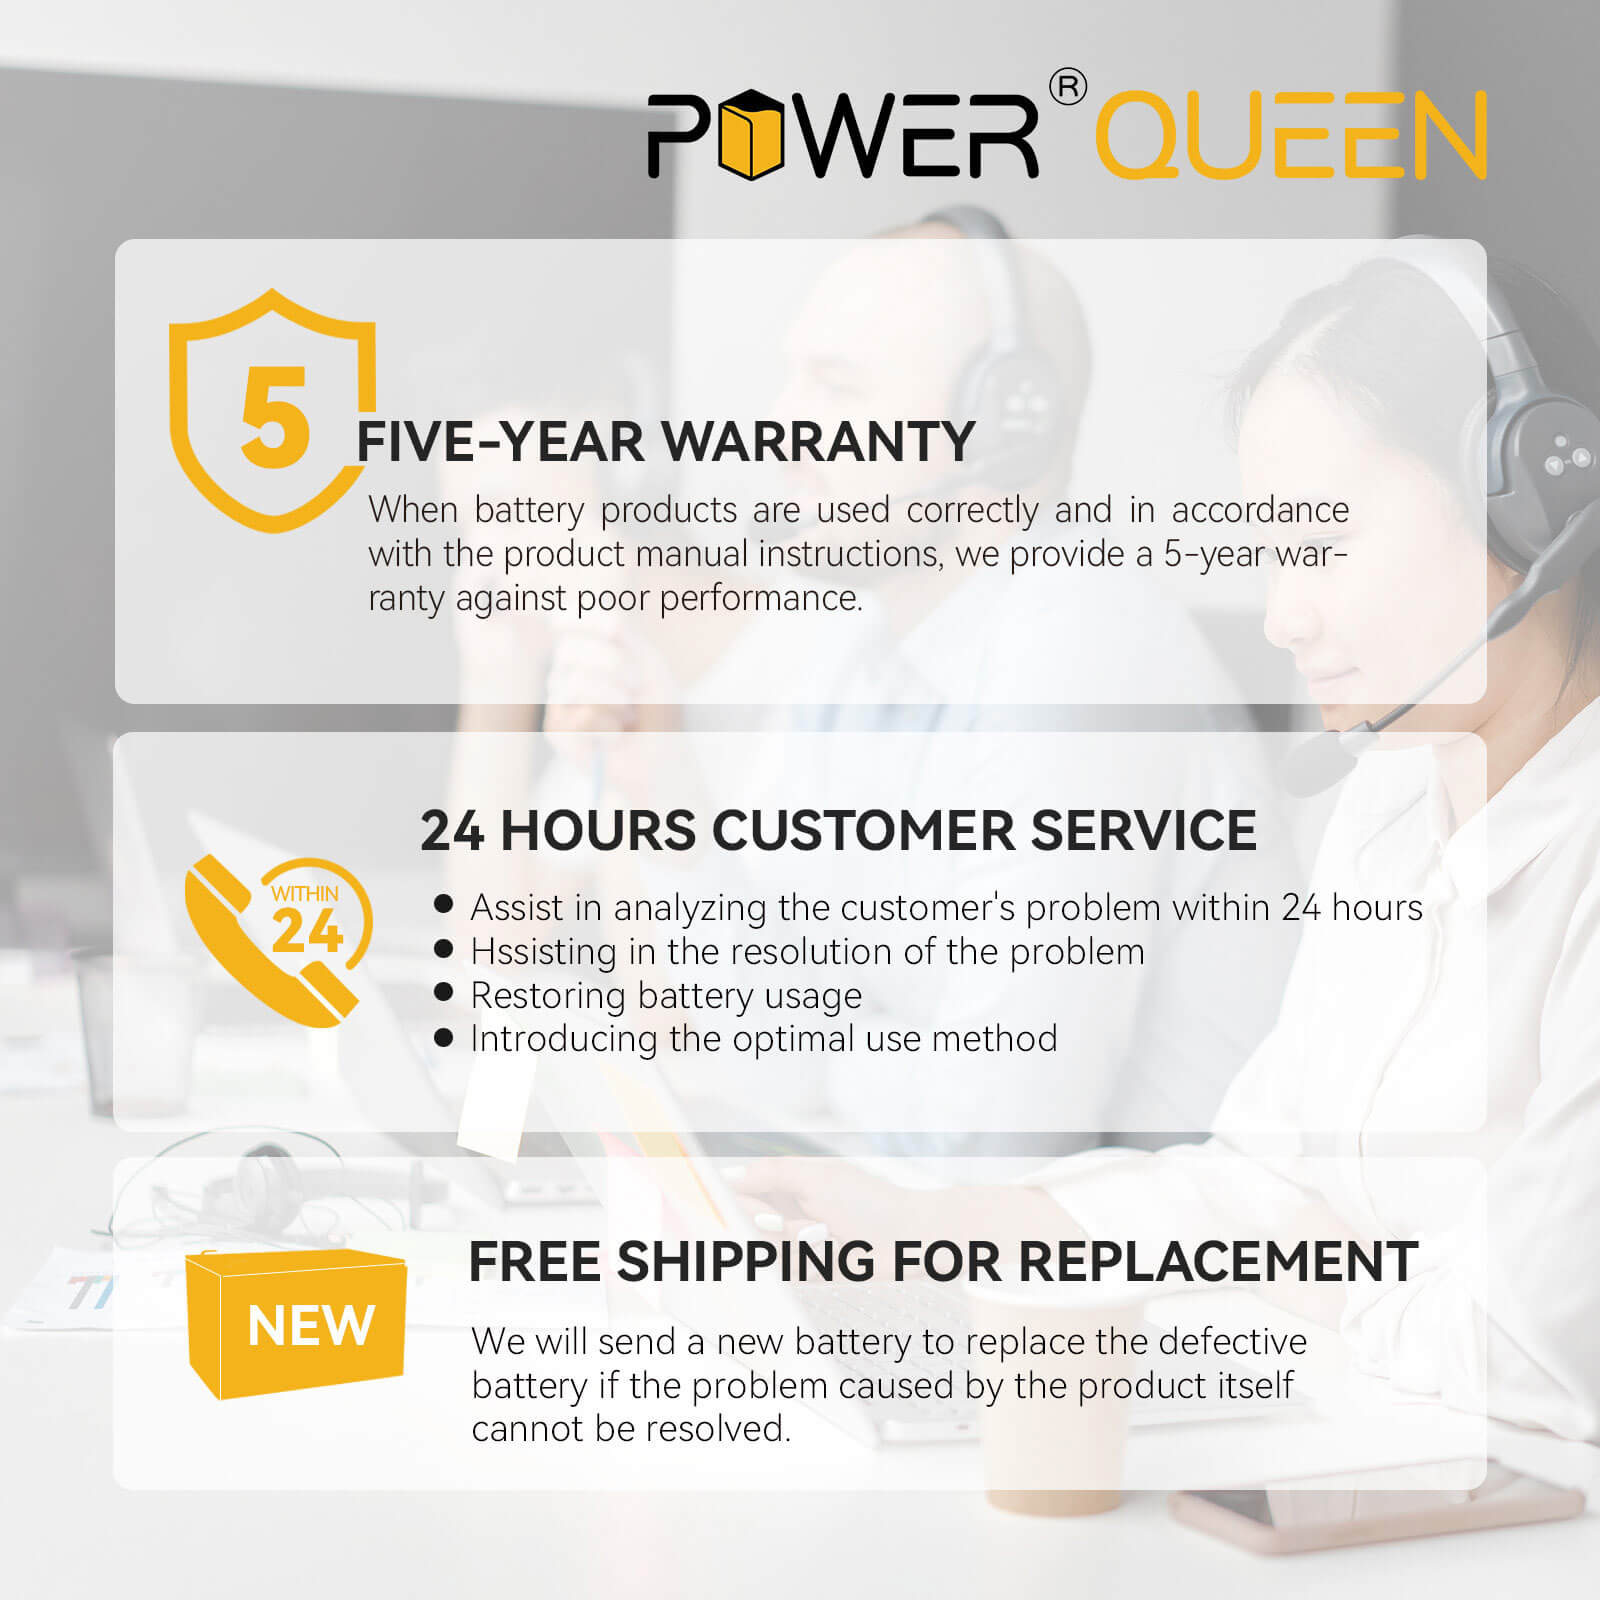 why-you-should-pick-up-the-power-queen-battery